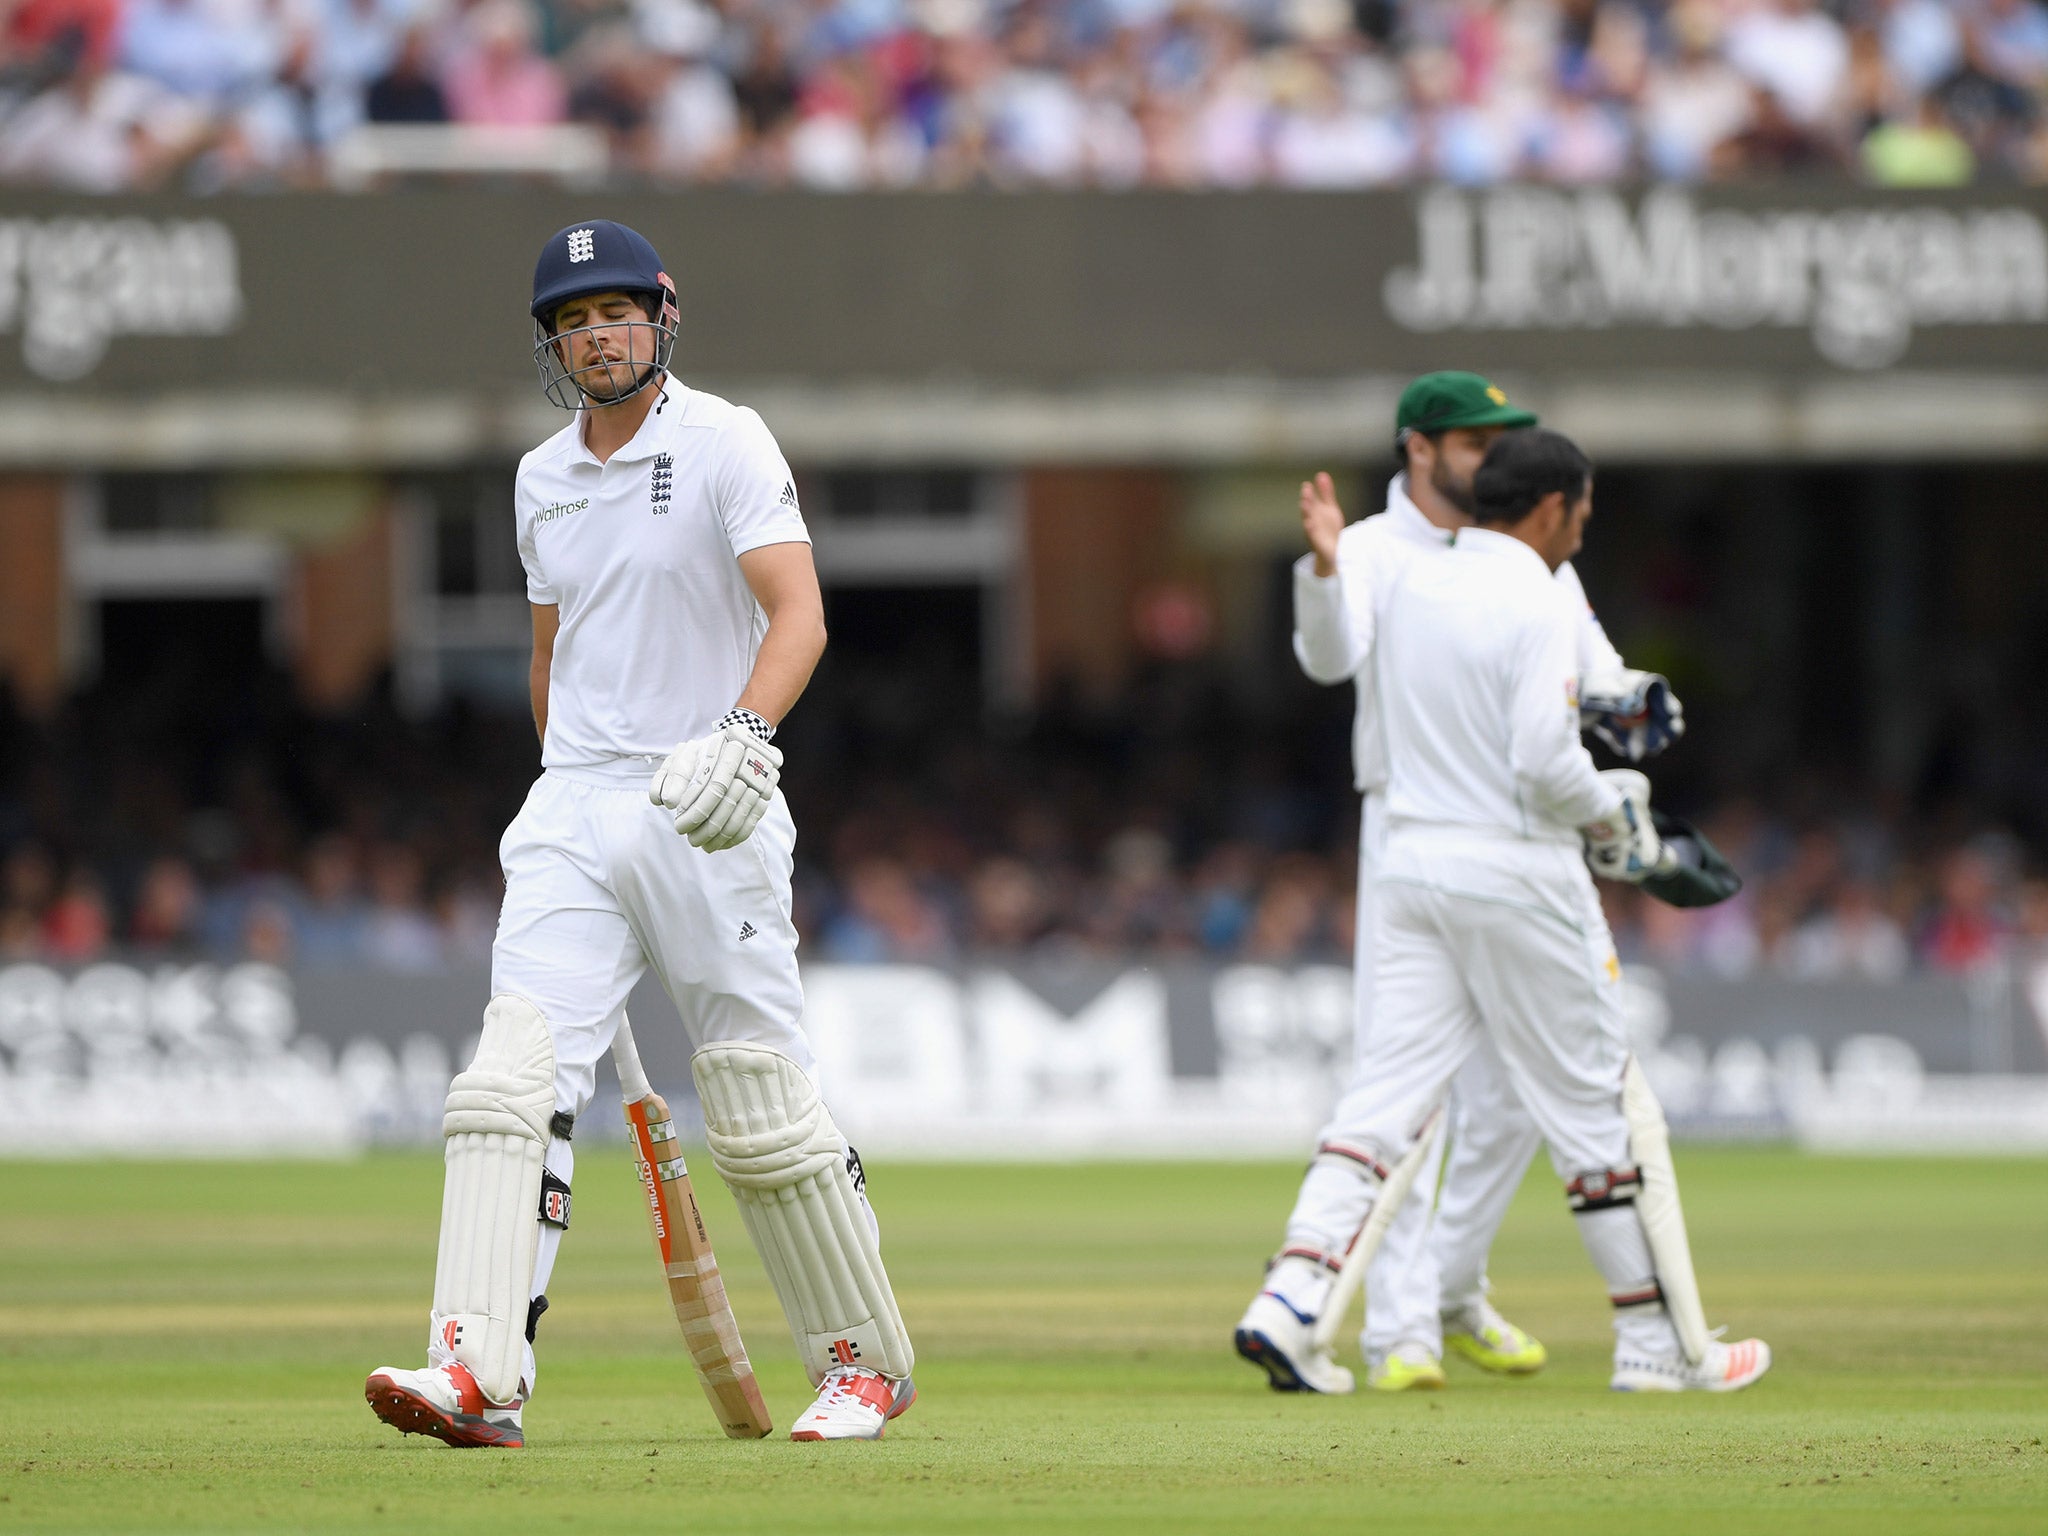 Alastair Cook believes England showed too much naivety against Pakistan in the first Test defeat